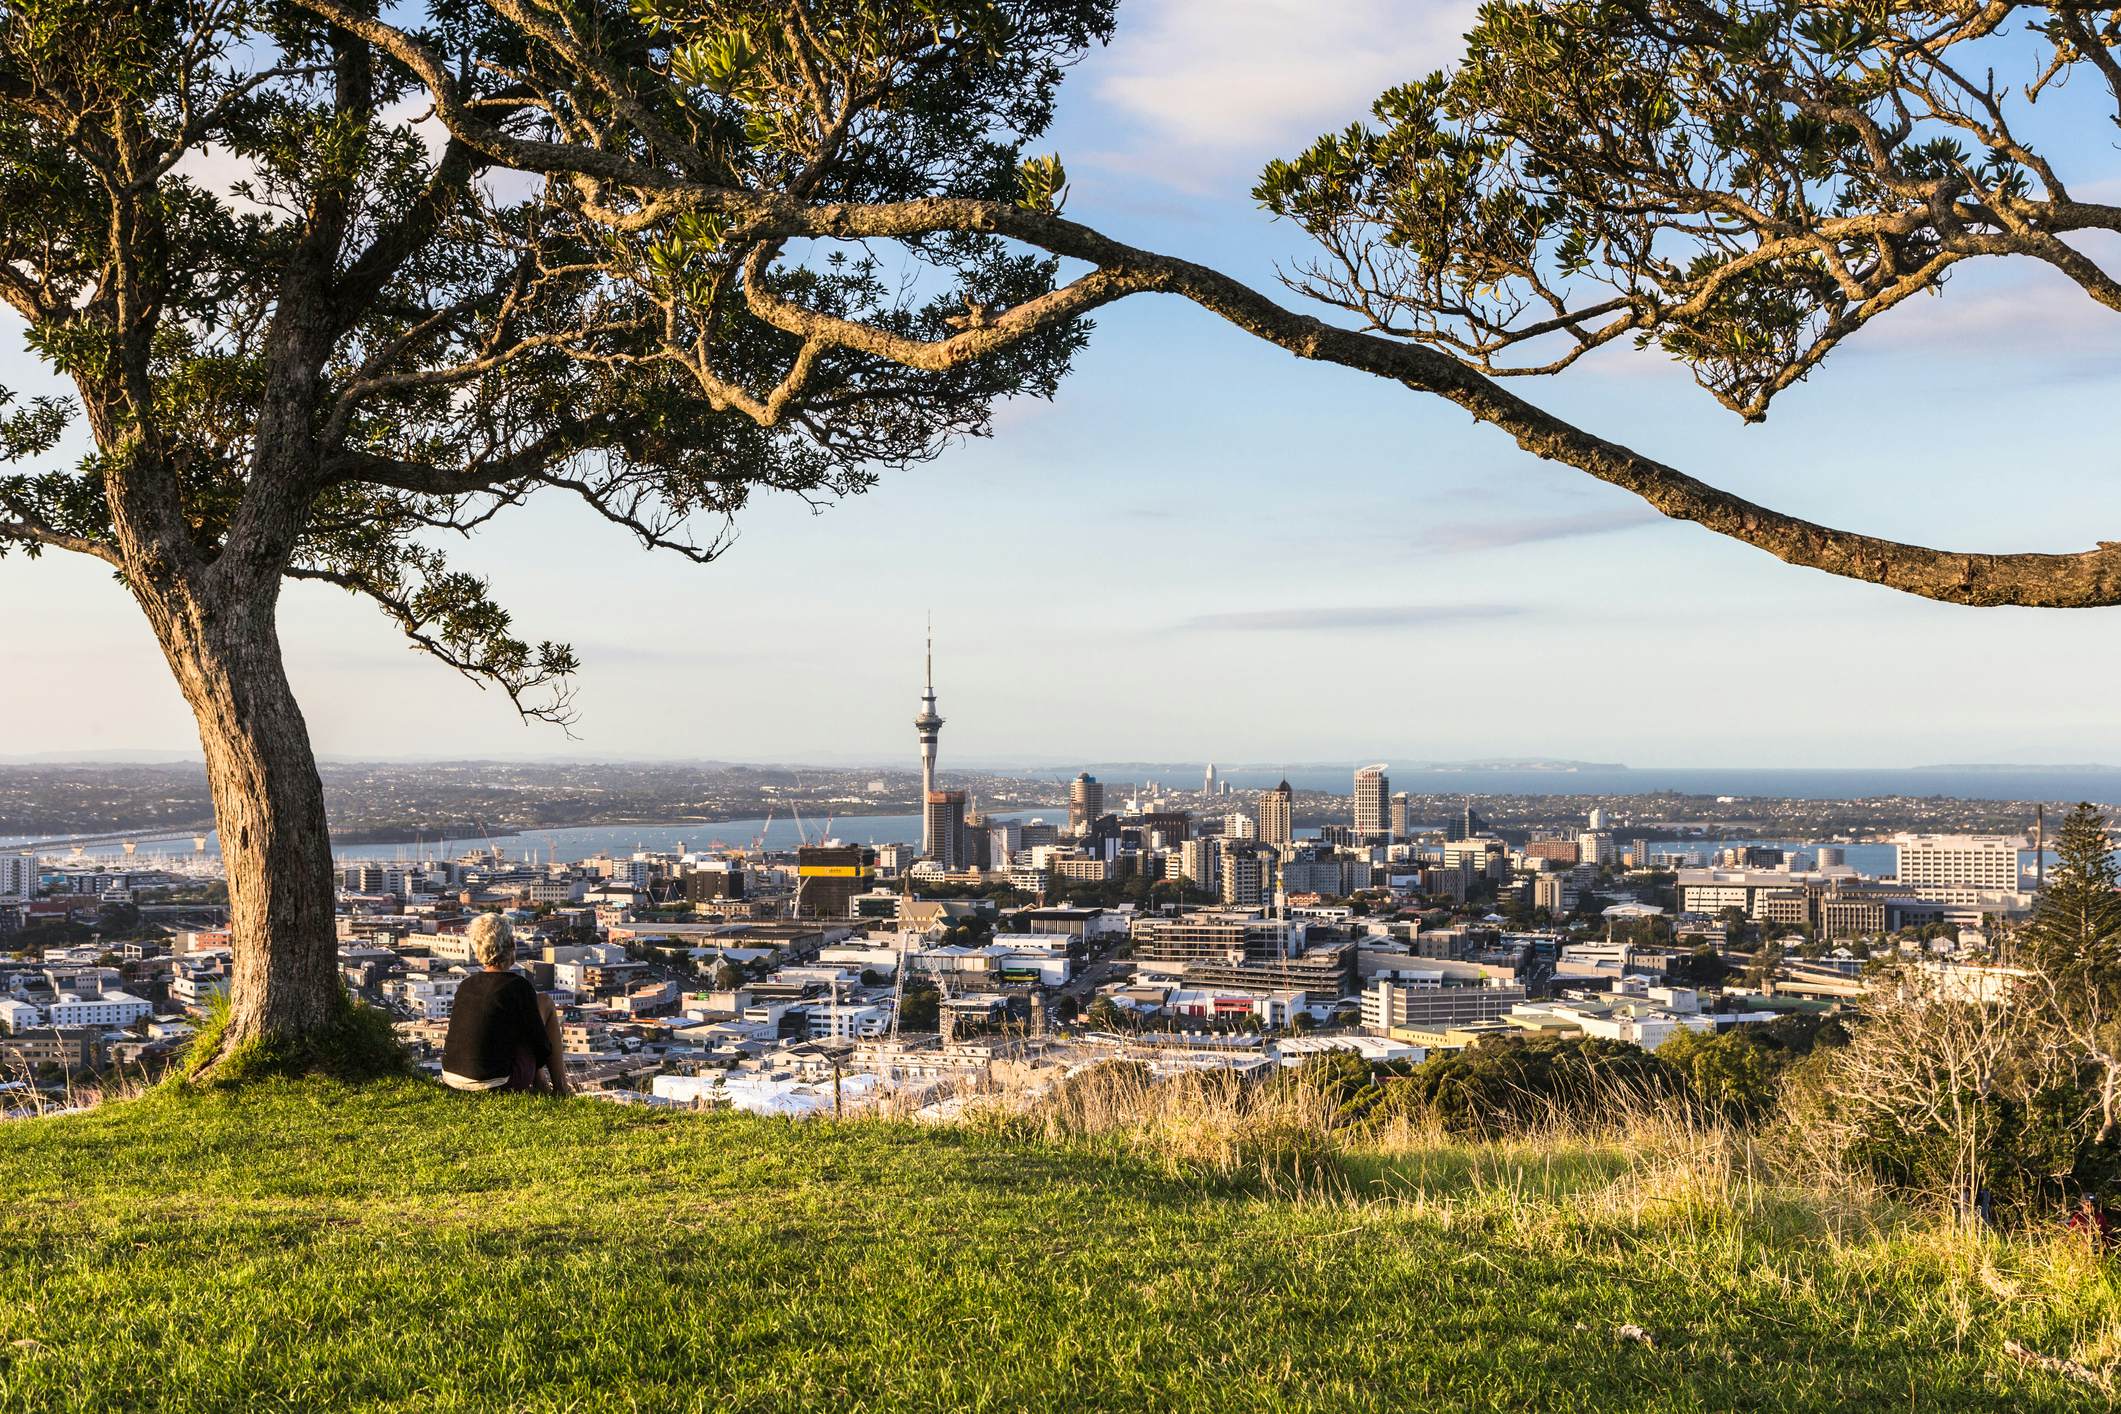 Auckland Museum has got it in the bag this winter